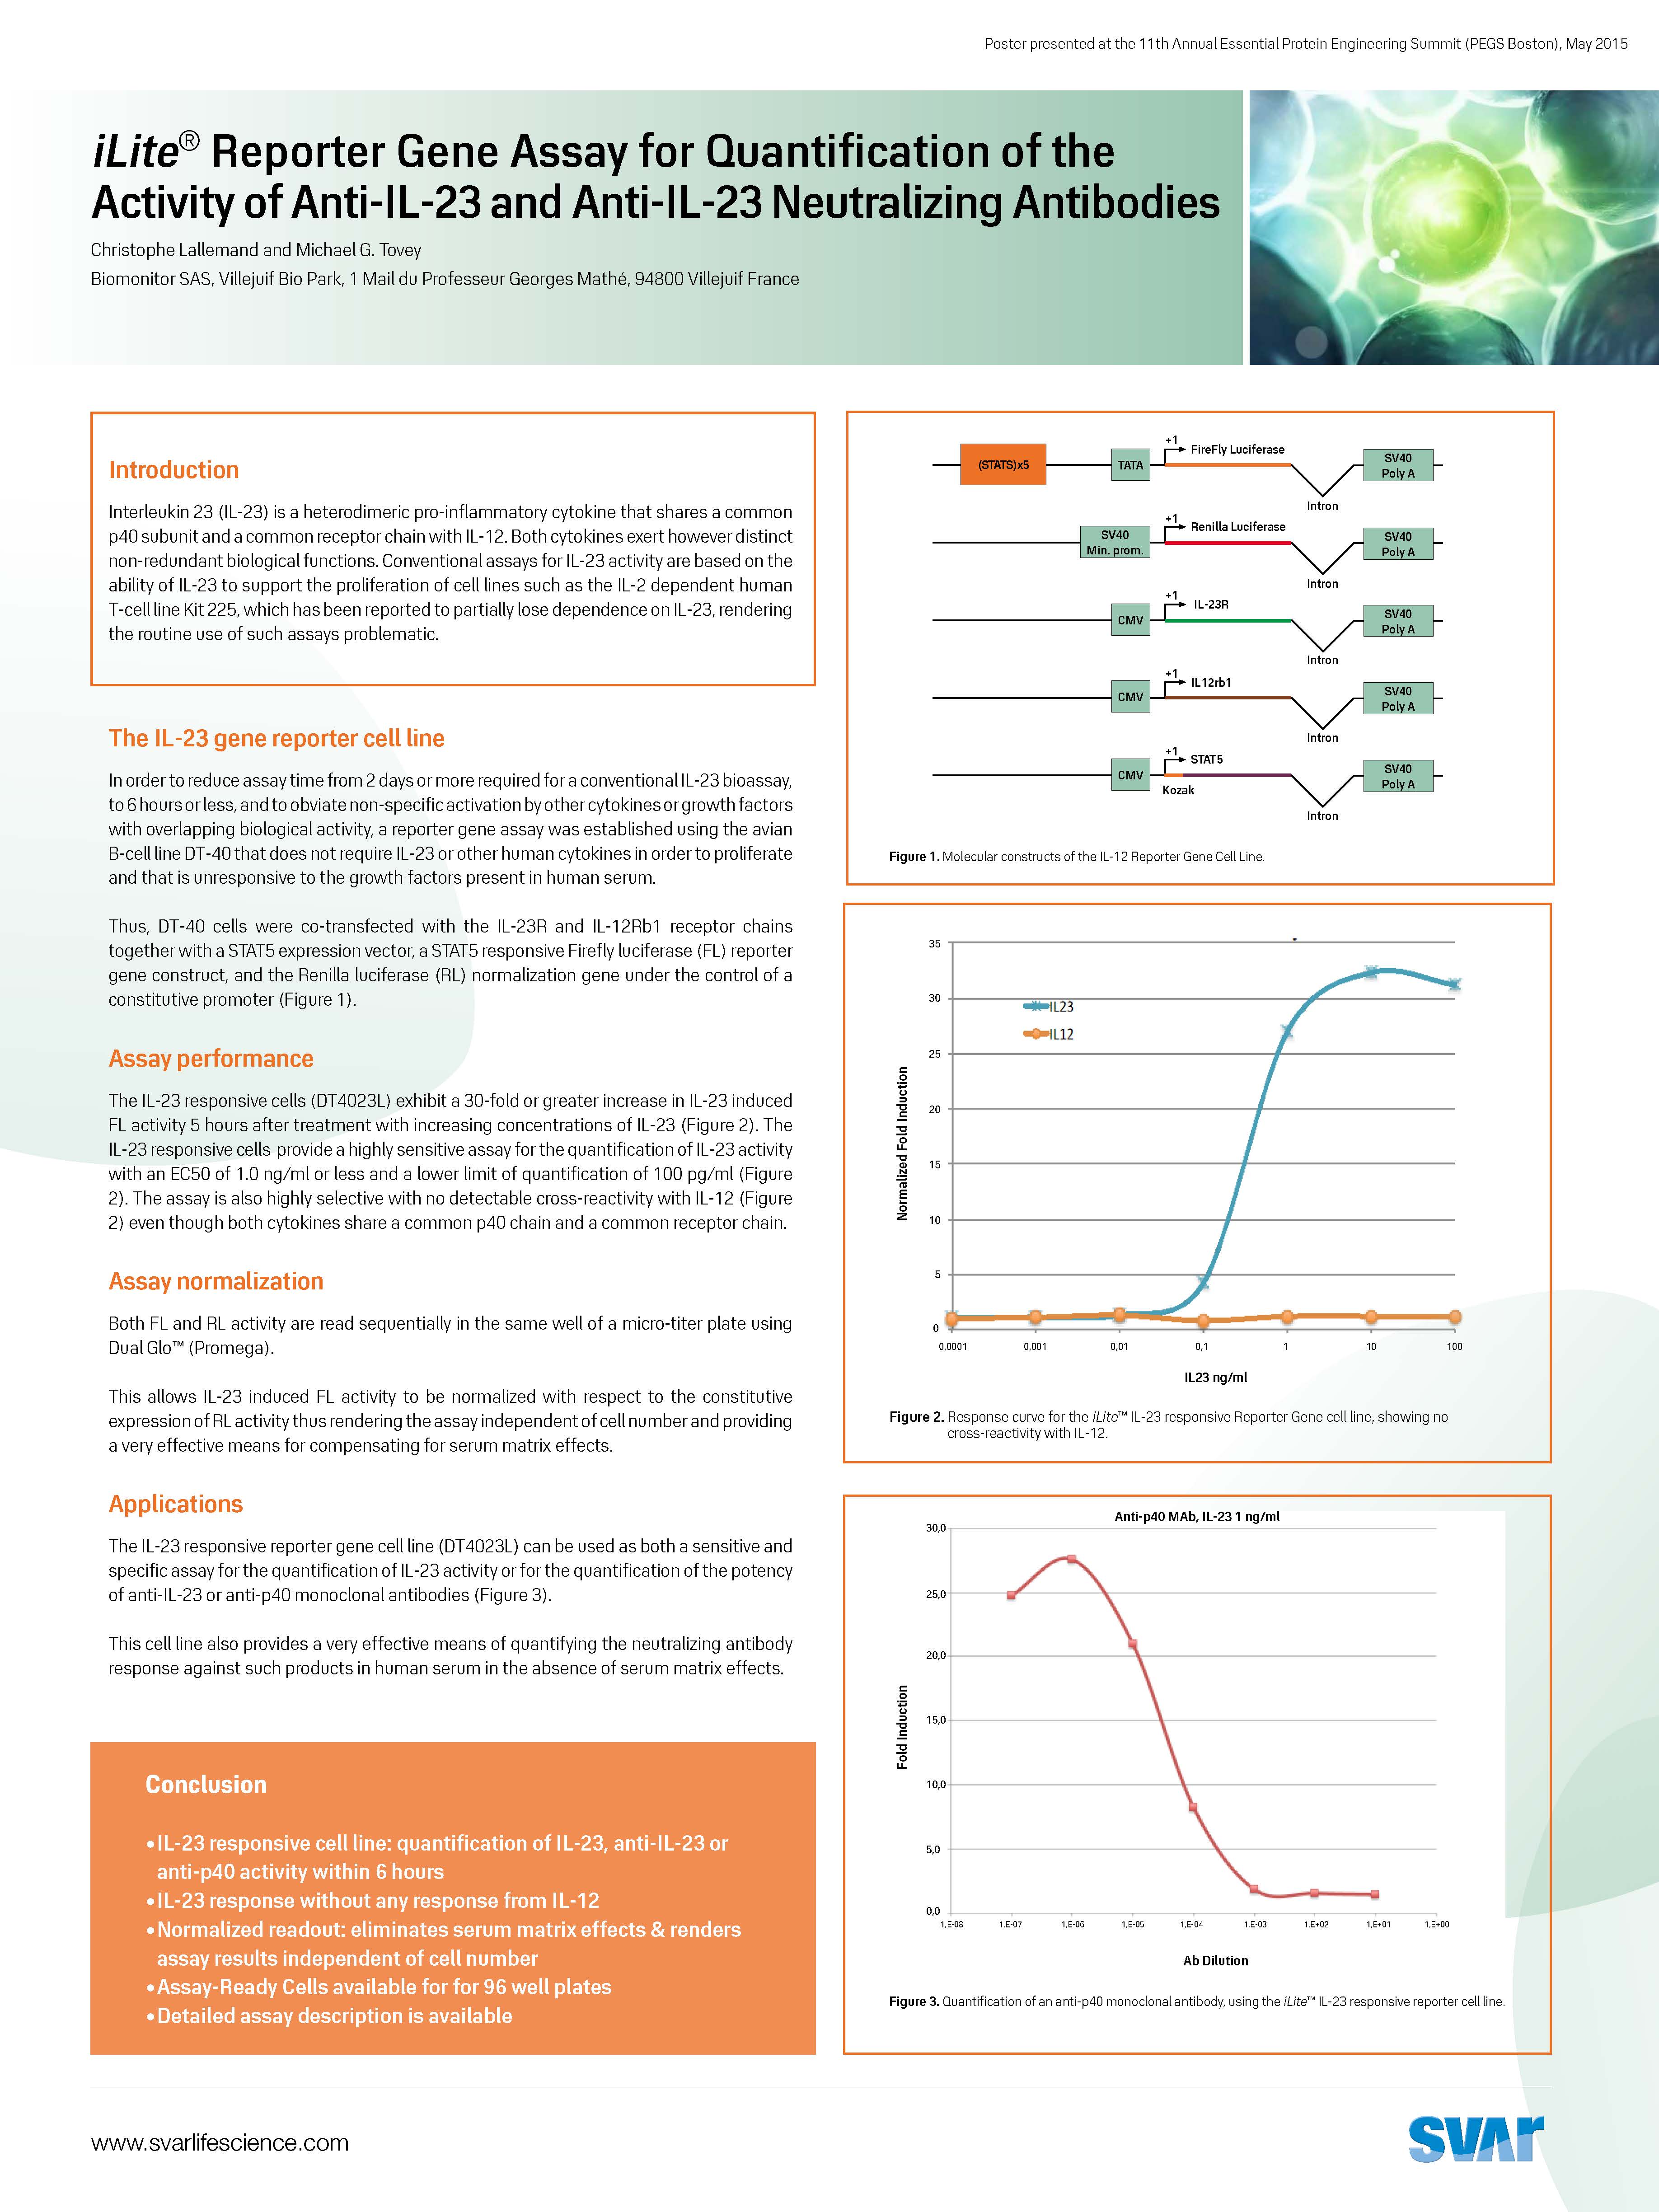 Scientific Poster: iLite® Reporter Gene Assay for Quantification of the Activity of Anti-IL-23 and Anti-IL-23 Neutralizing Antibodies